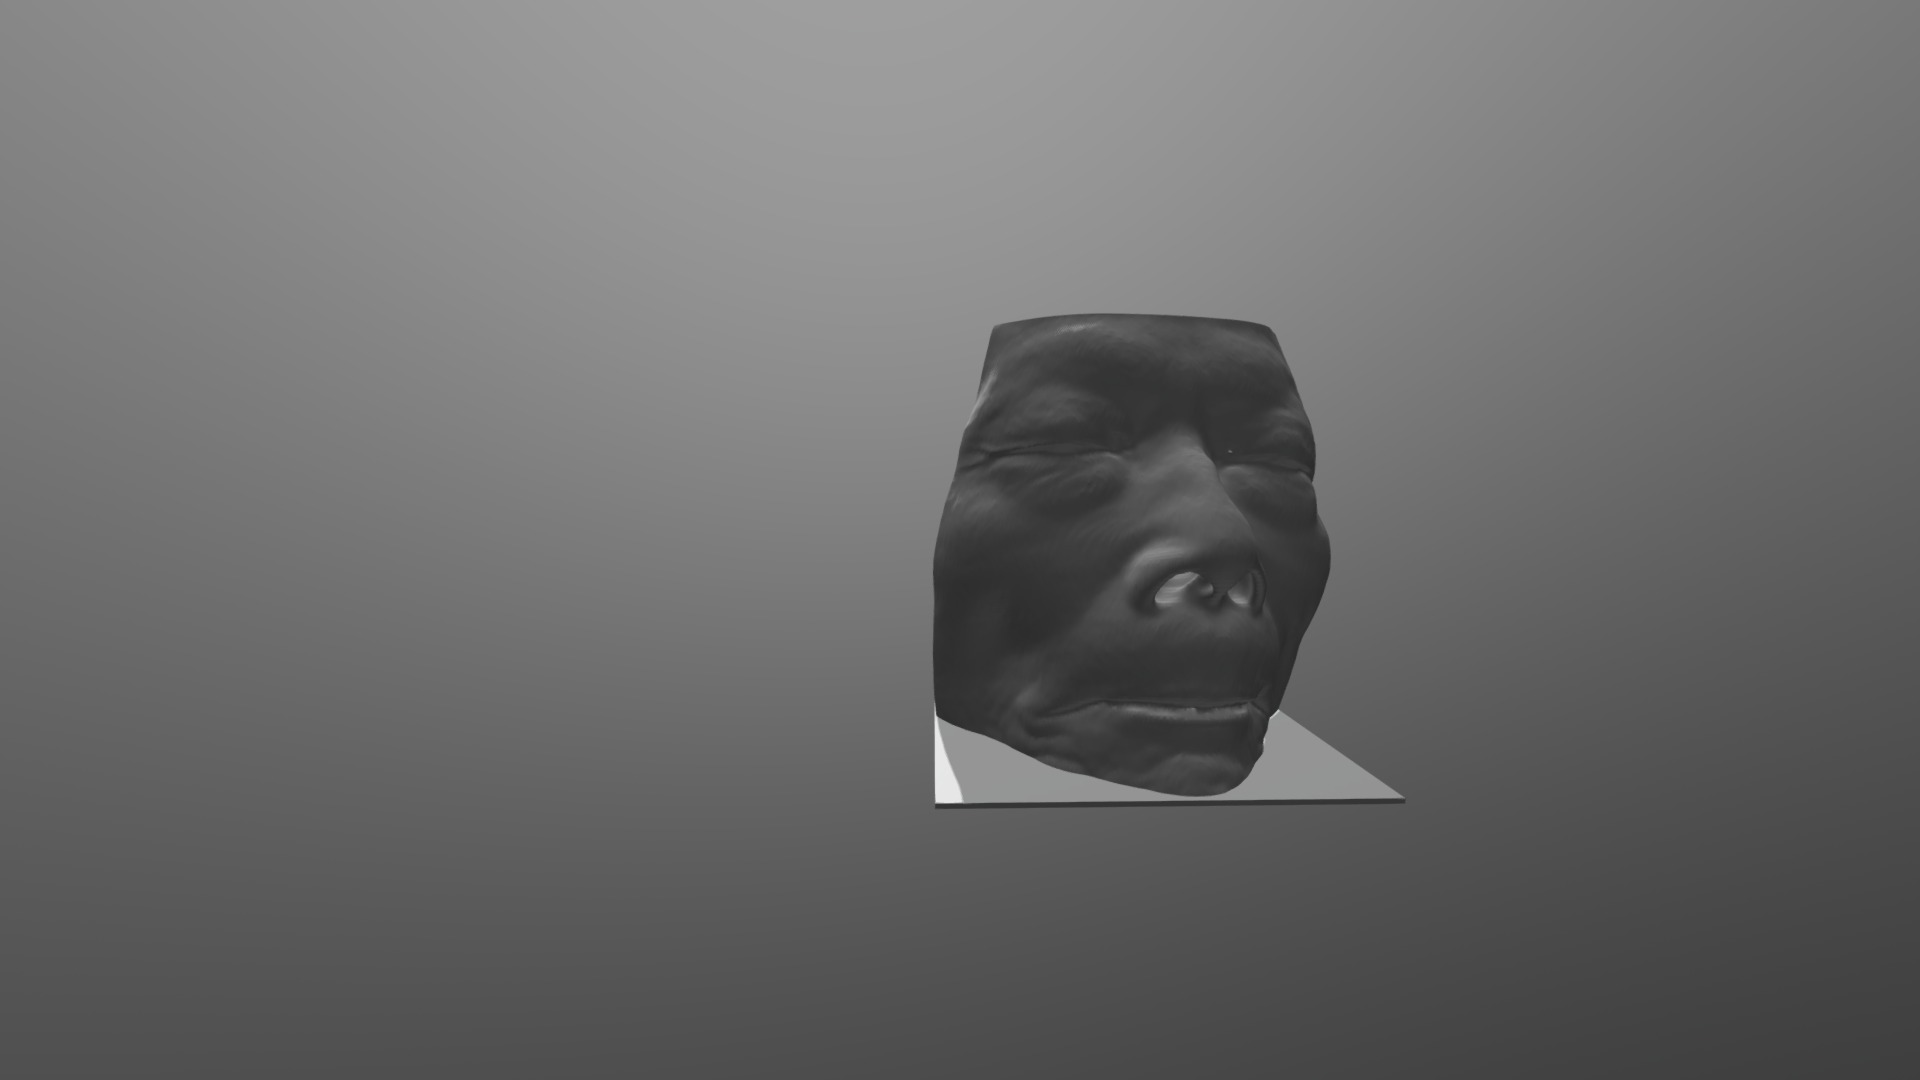 3D model Head airway(nasal sinuses were hollow) - This is a 3D model of the Head airway(nasal sinuses were hollow). The 3D model is about a man's head in a black and white photo.